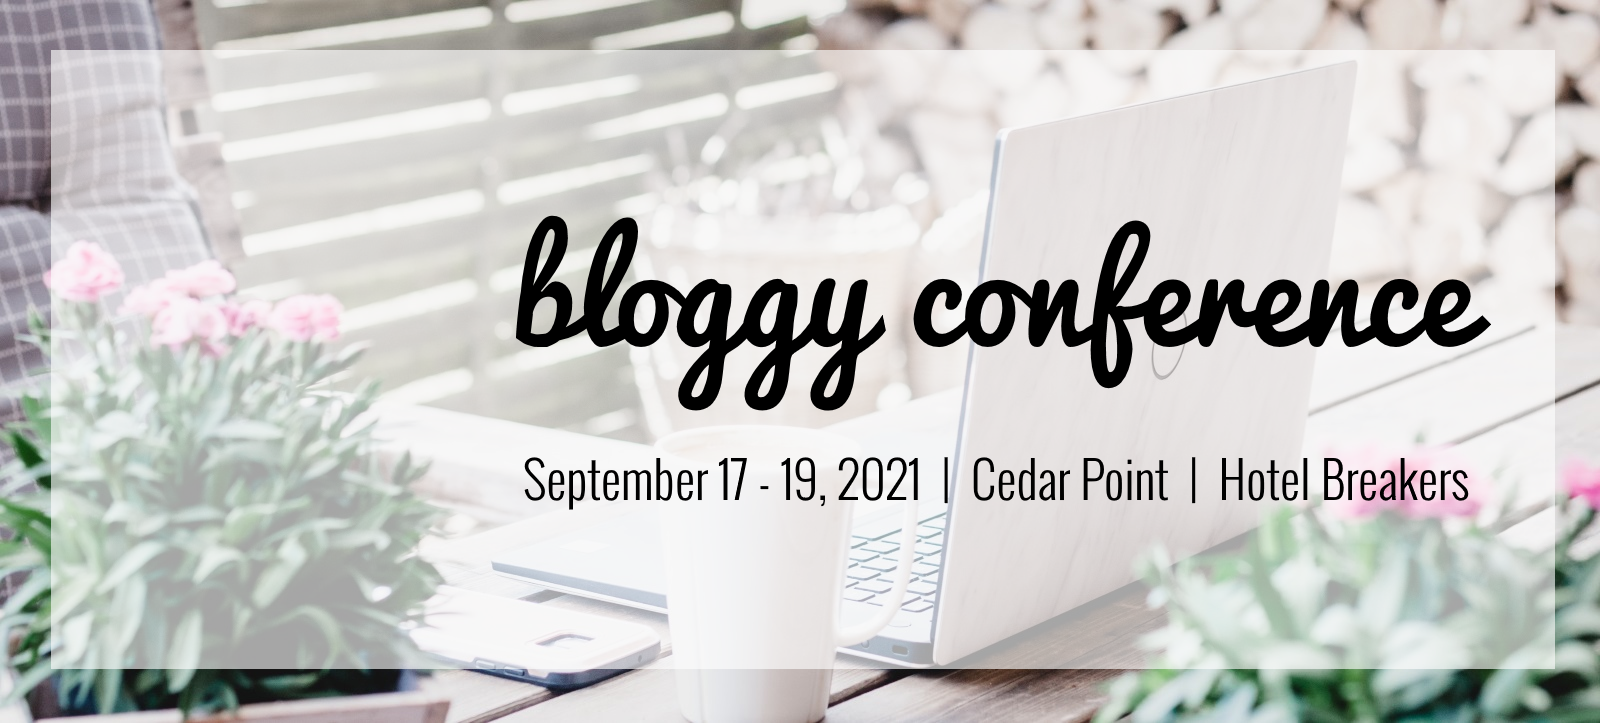 bloggy conference header 2021